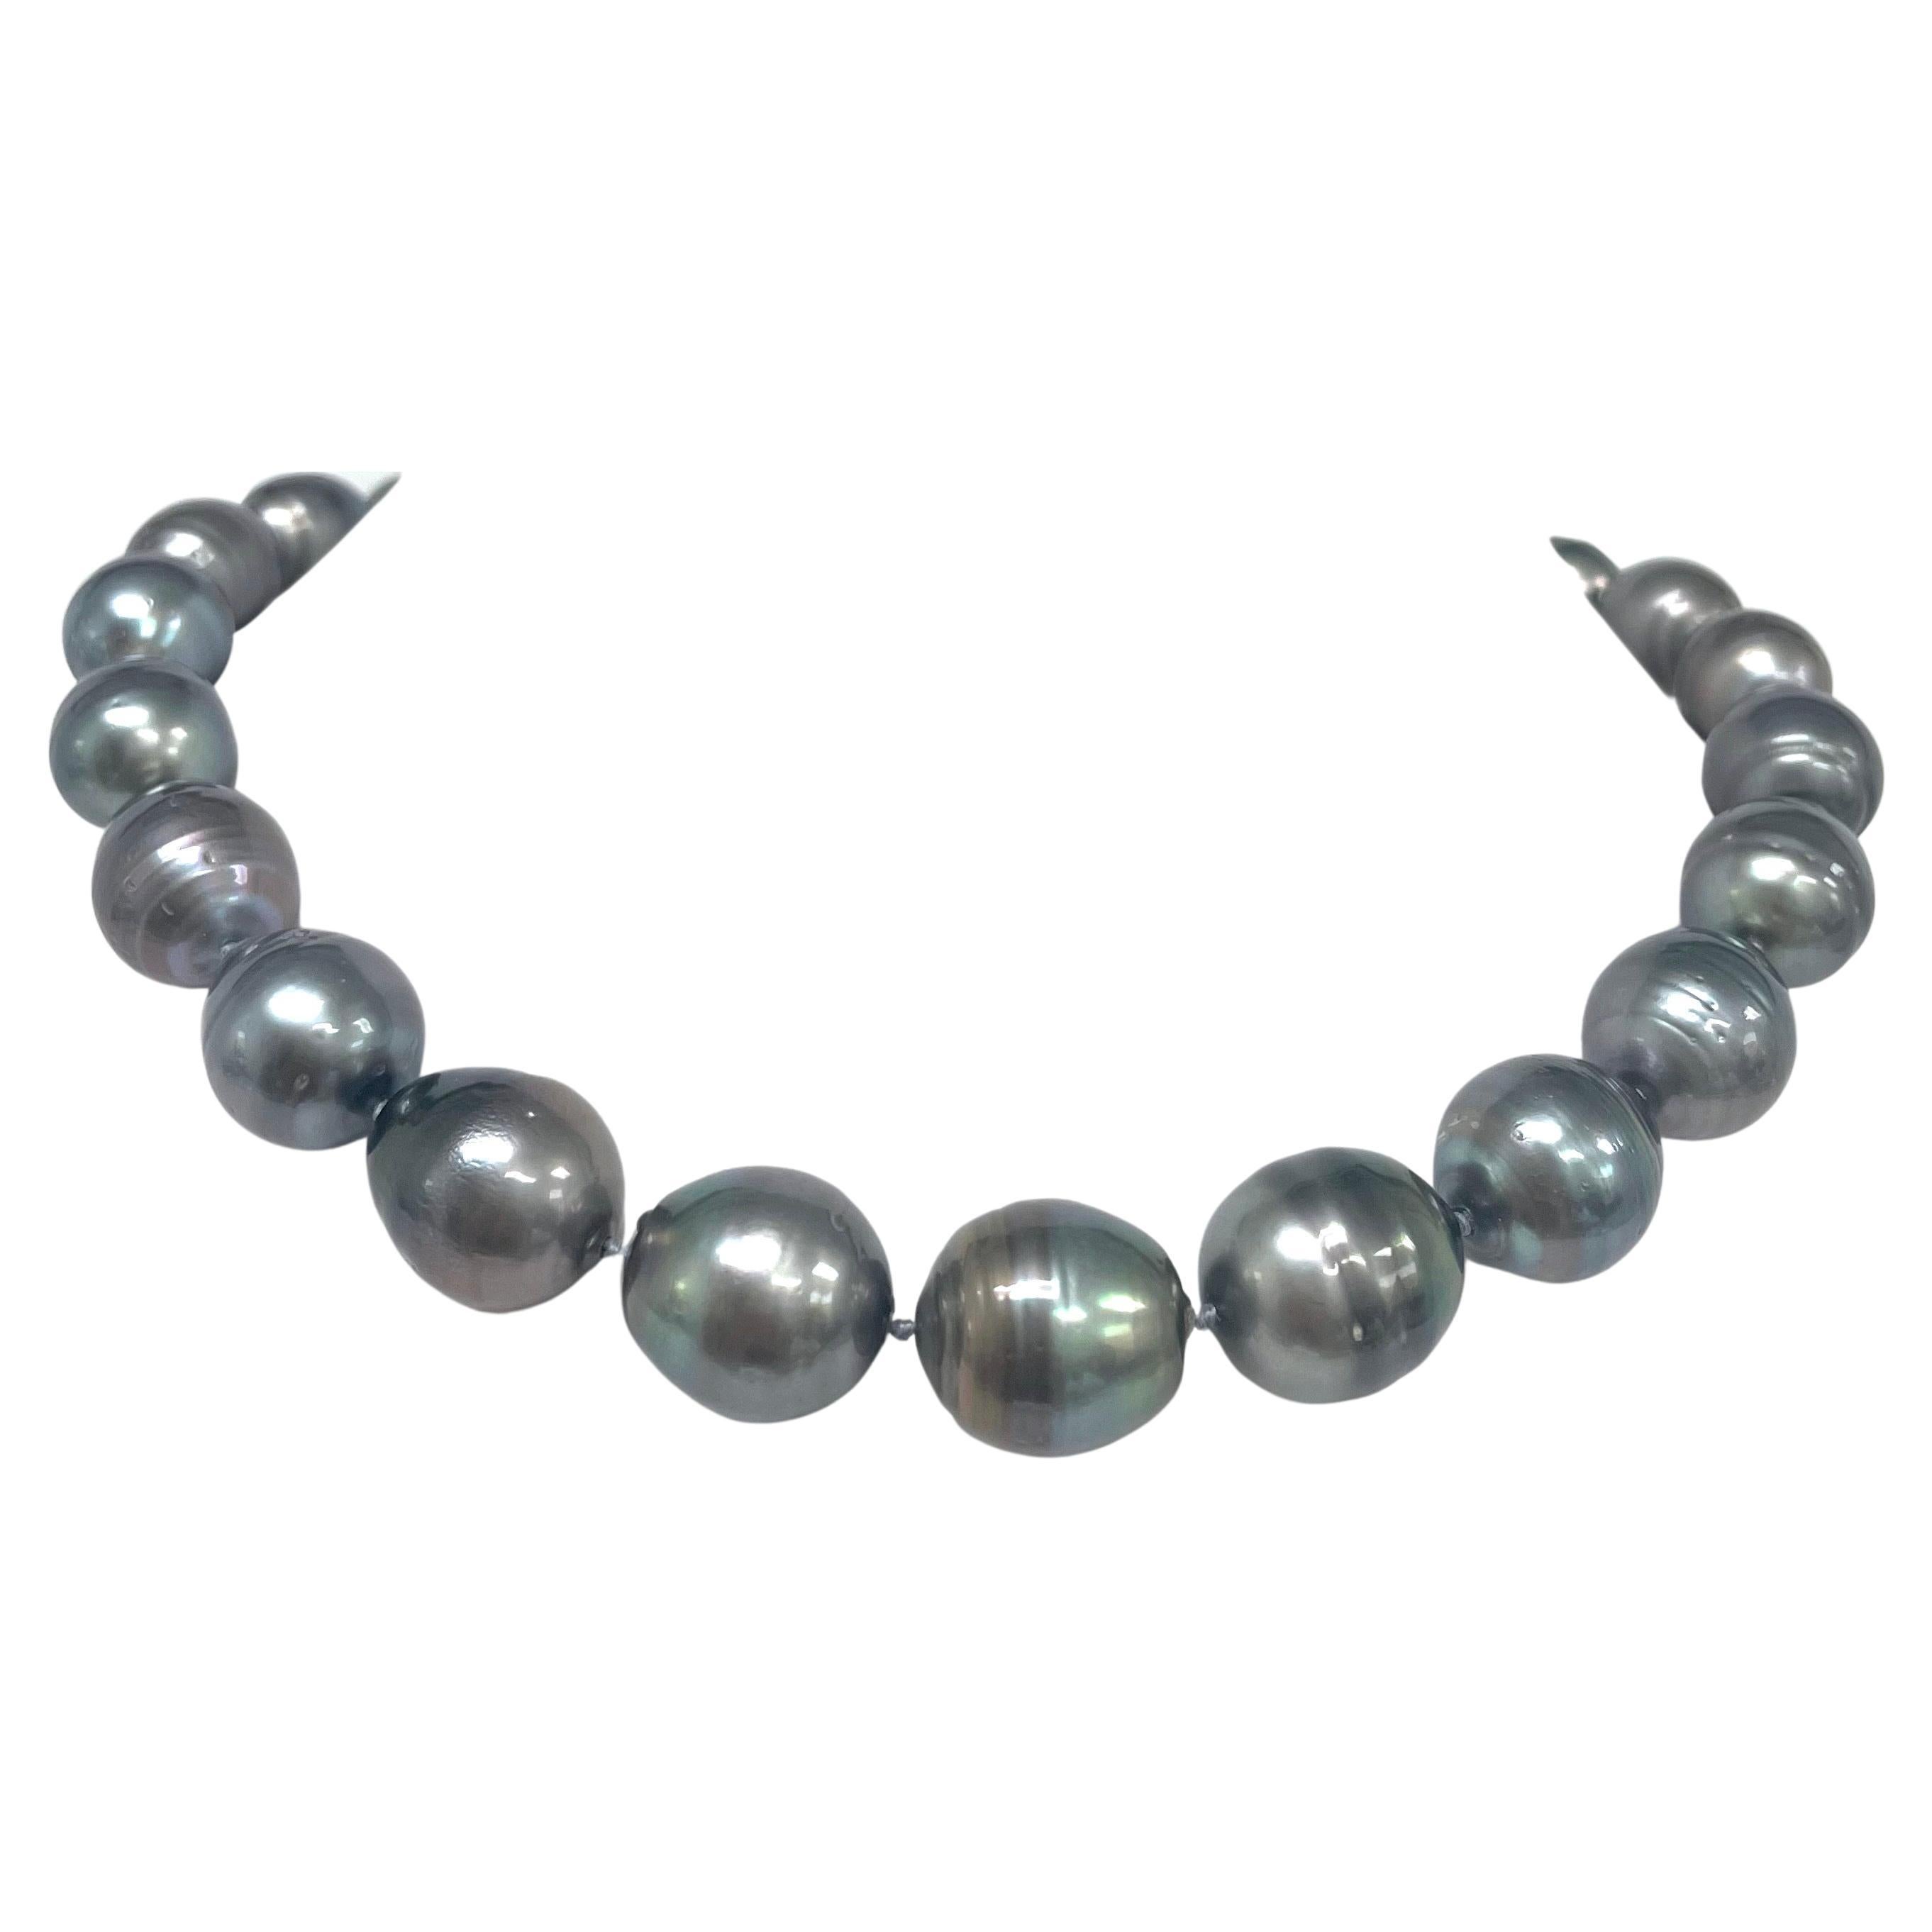 Oval Cut Enormous Gray Tahitian Pearl Necklace For Sale